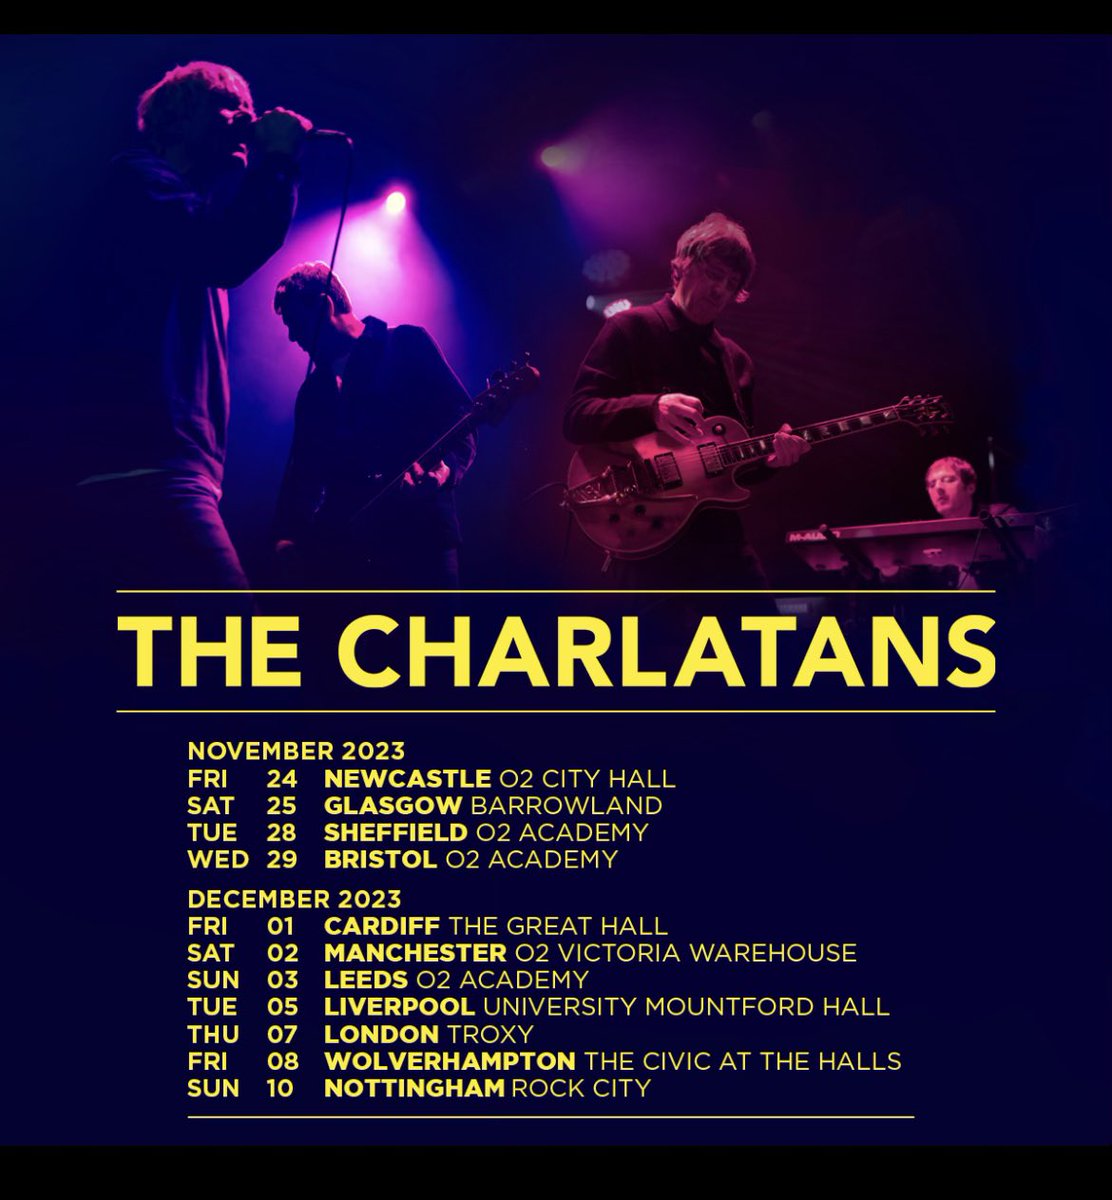 Would love to see #Charlatans in Mcr again! New dates!
#TimsTicketGiveaway